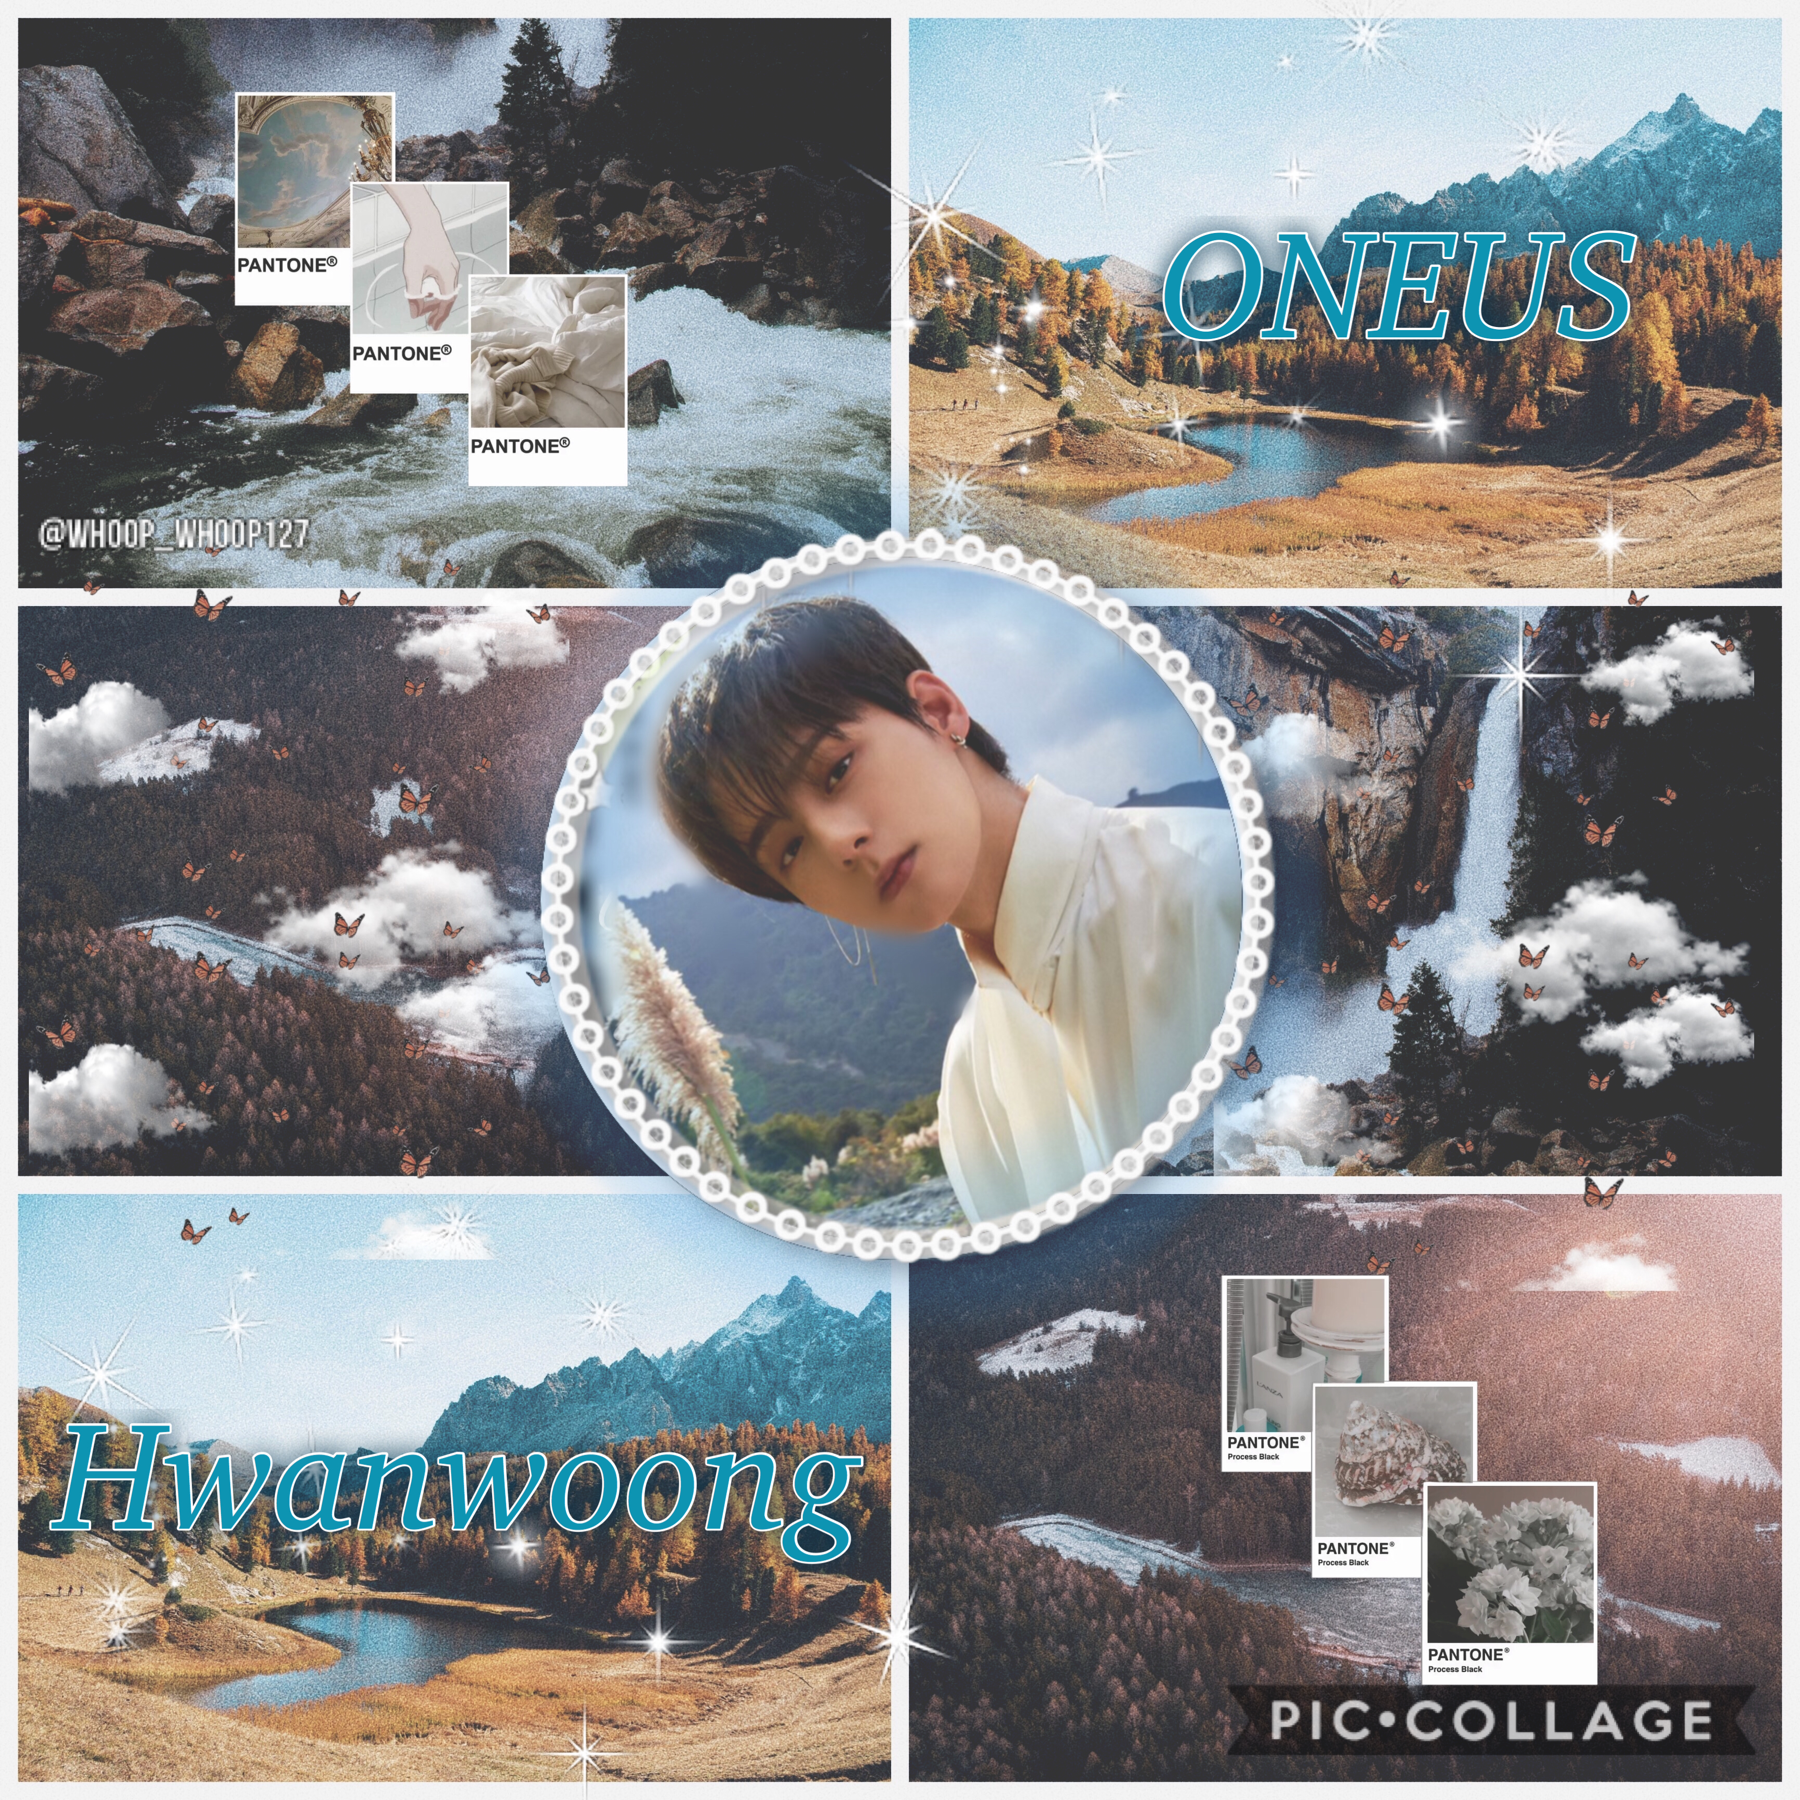 •🚒•
🌷Hwanwoong~ONEUS🌷
When you realize that you’ve been saying “ONE US” incorrectly bc you thought it was pronounced “OH NEE US”😅😅 anyways their recent comebac was amazing I LOVE THE SONG AND THE MV IS SO AESTHETIC AhHhHh how could I not edit something fr